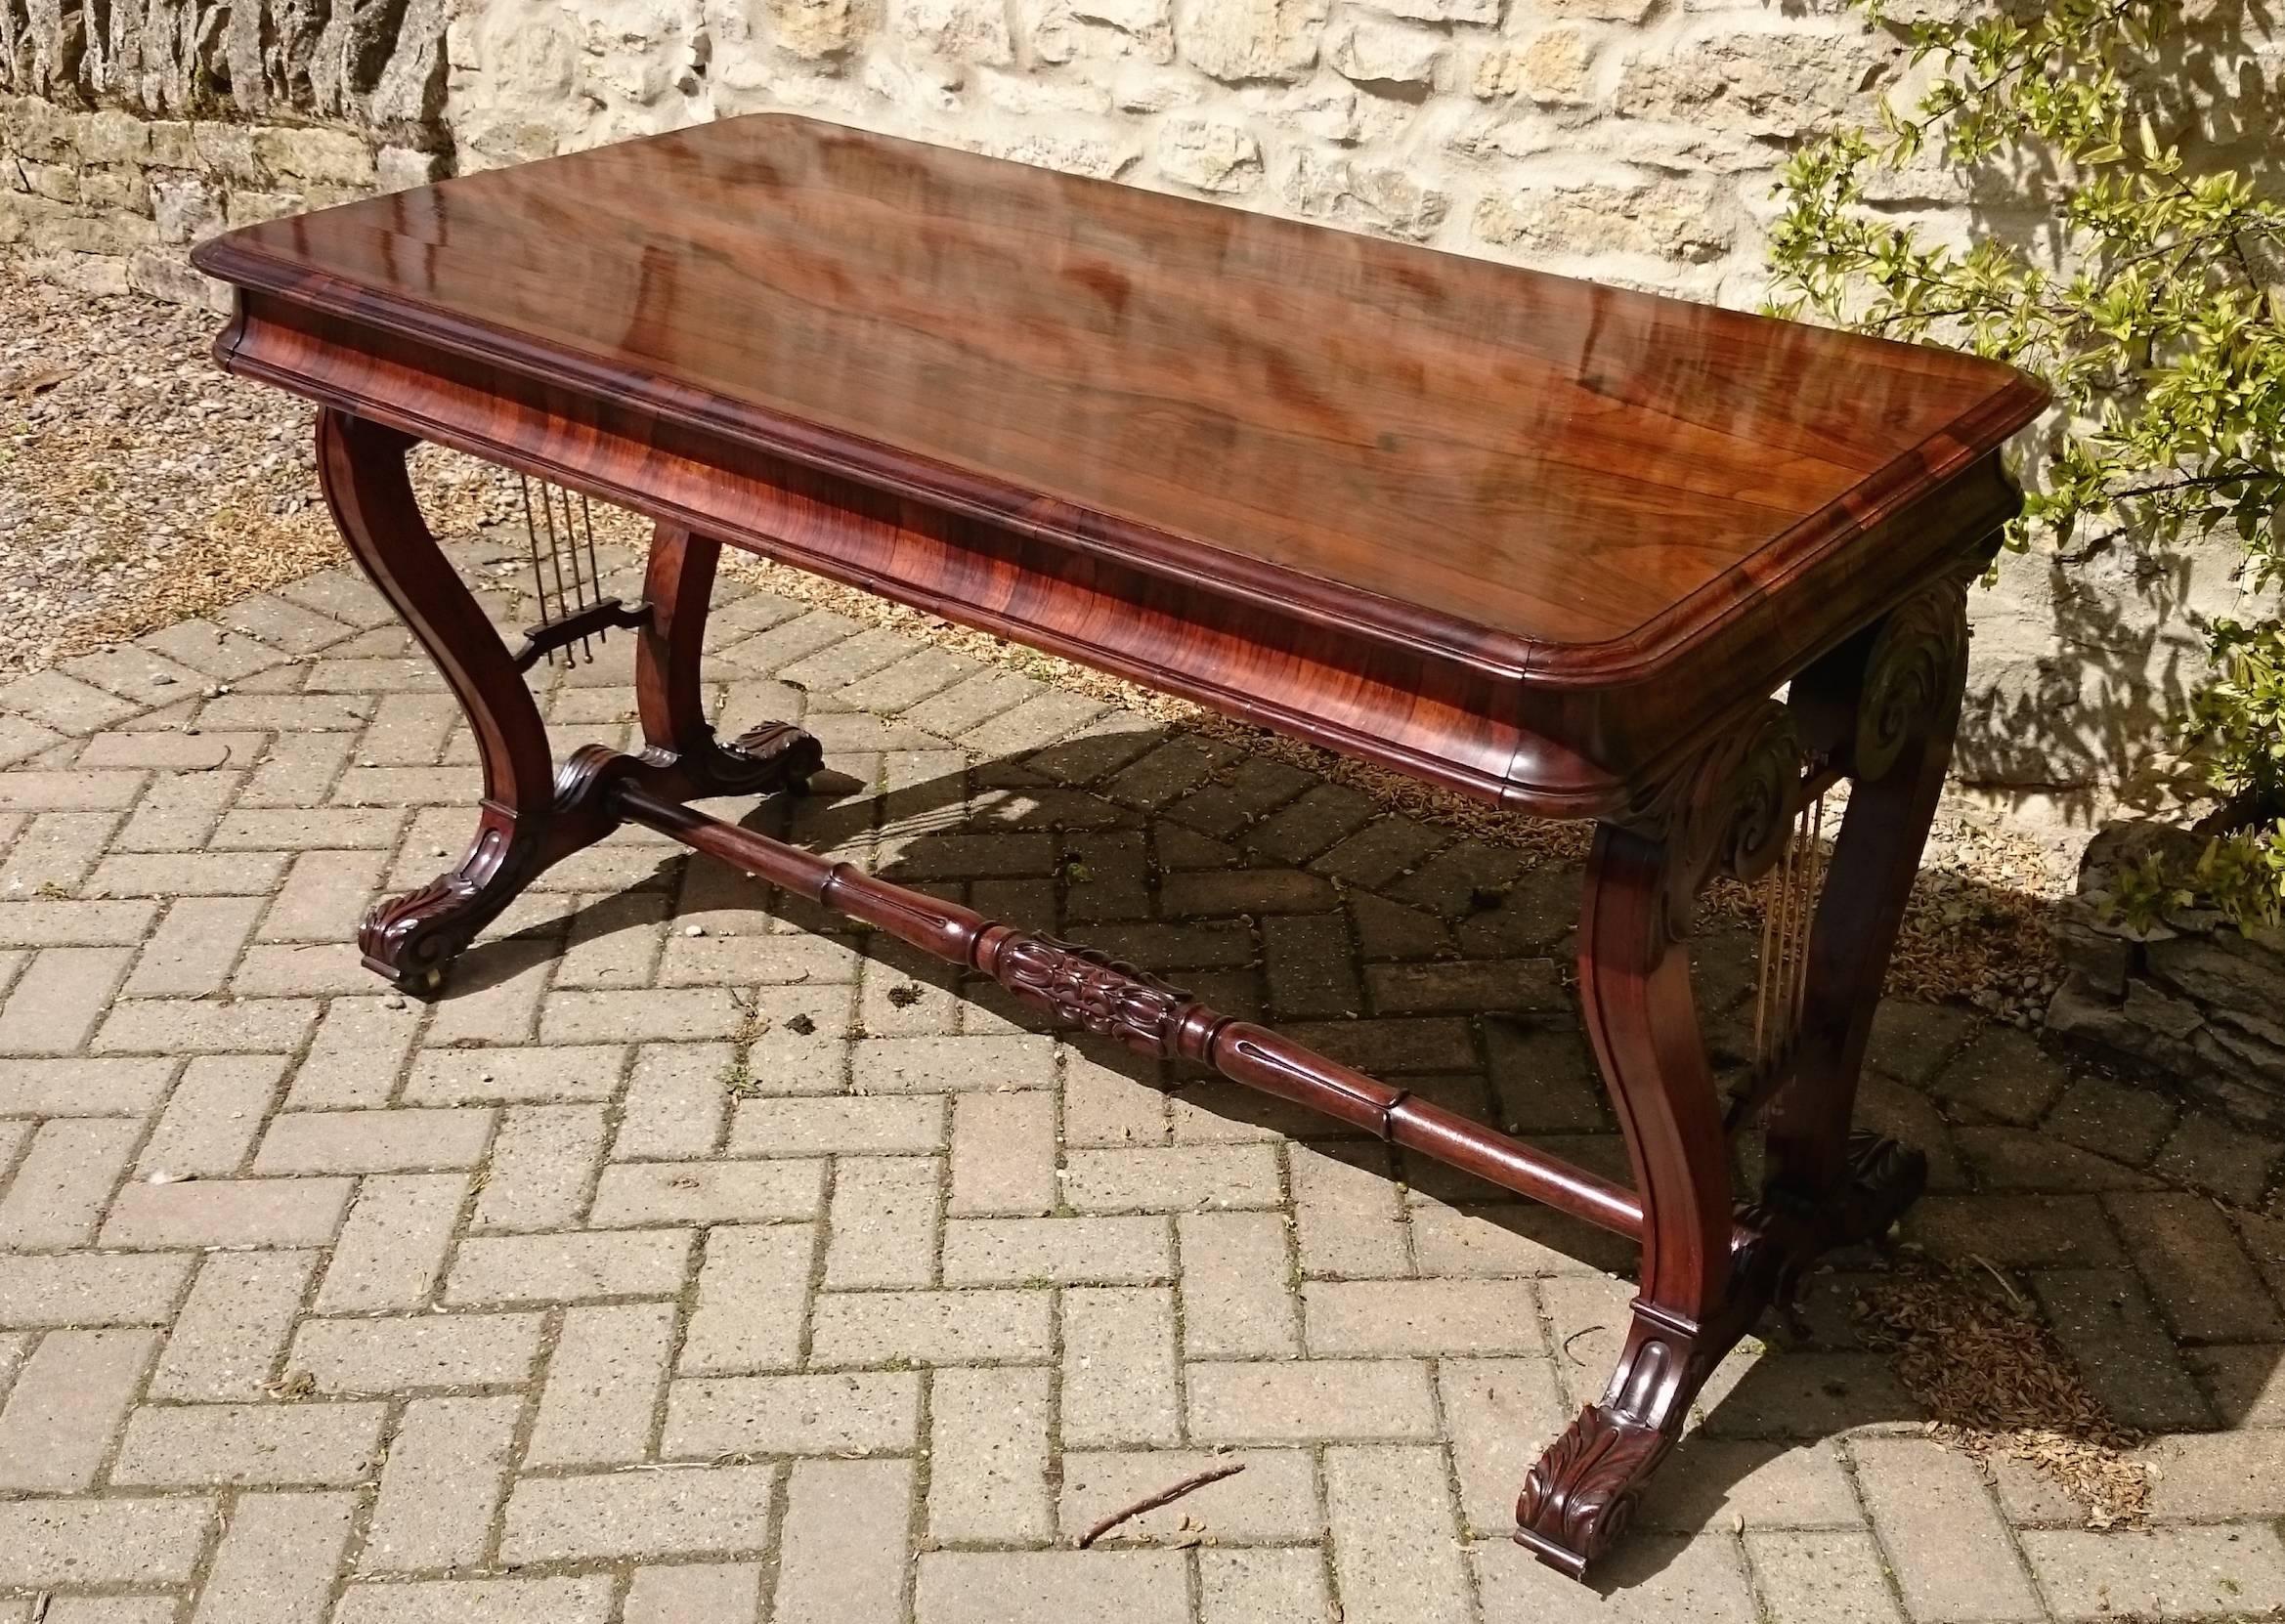 British 19th Century Regency Rosewood Library Table or Sofa Table of Exceptional Quality